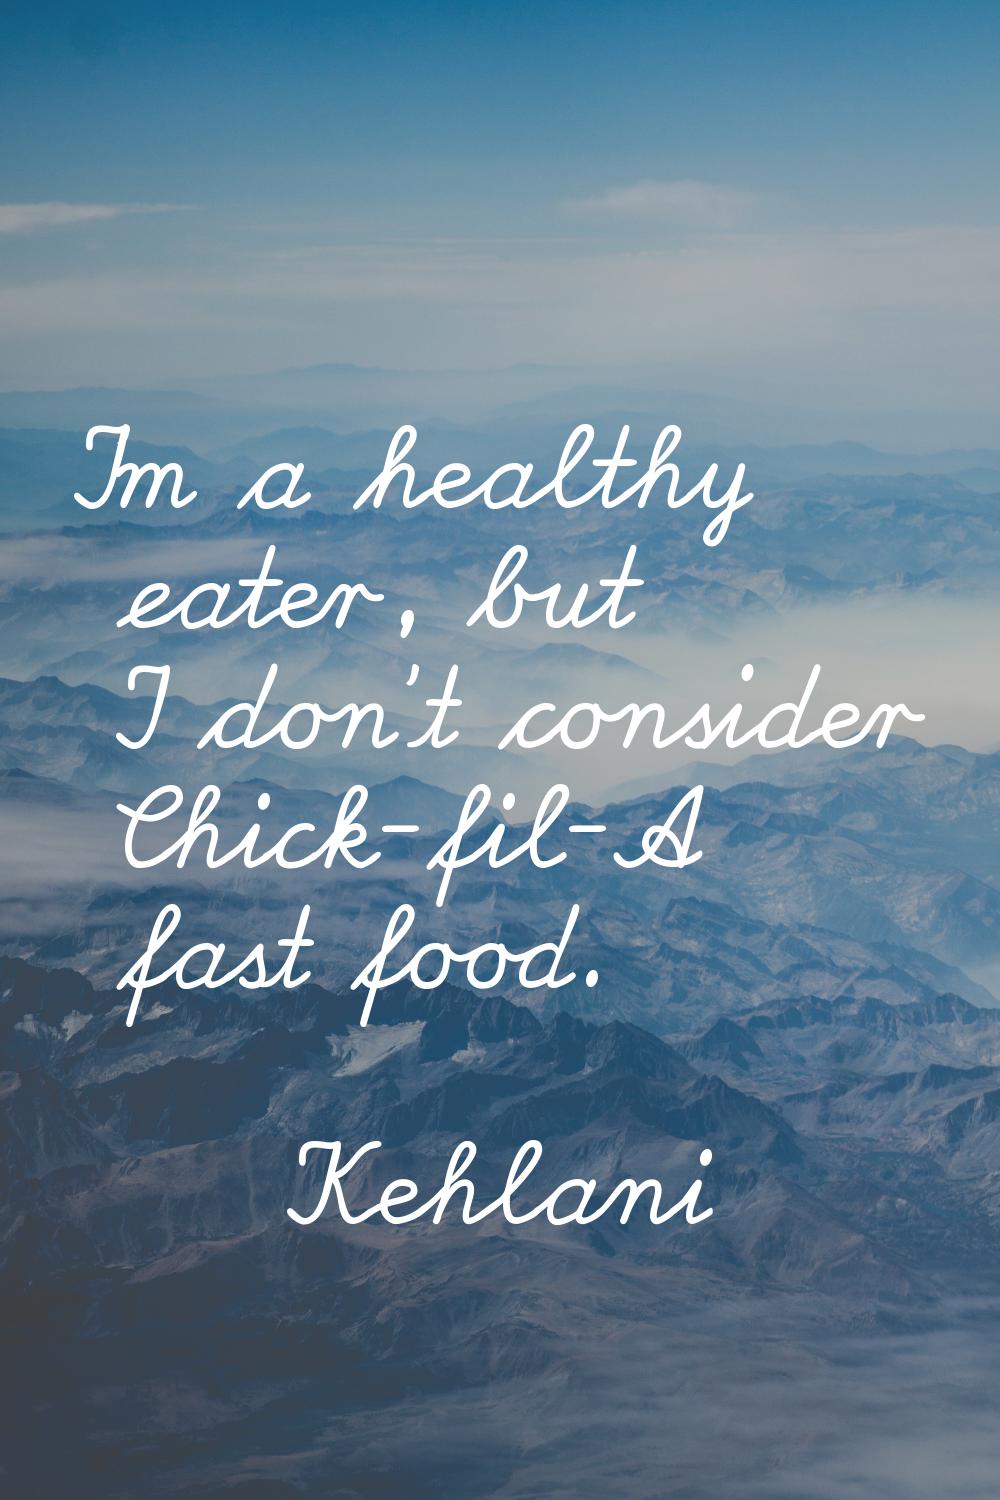 I'm a healthy eater, but I don't consider Chick-fil-A fast food.